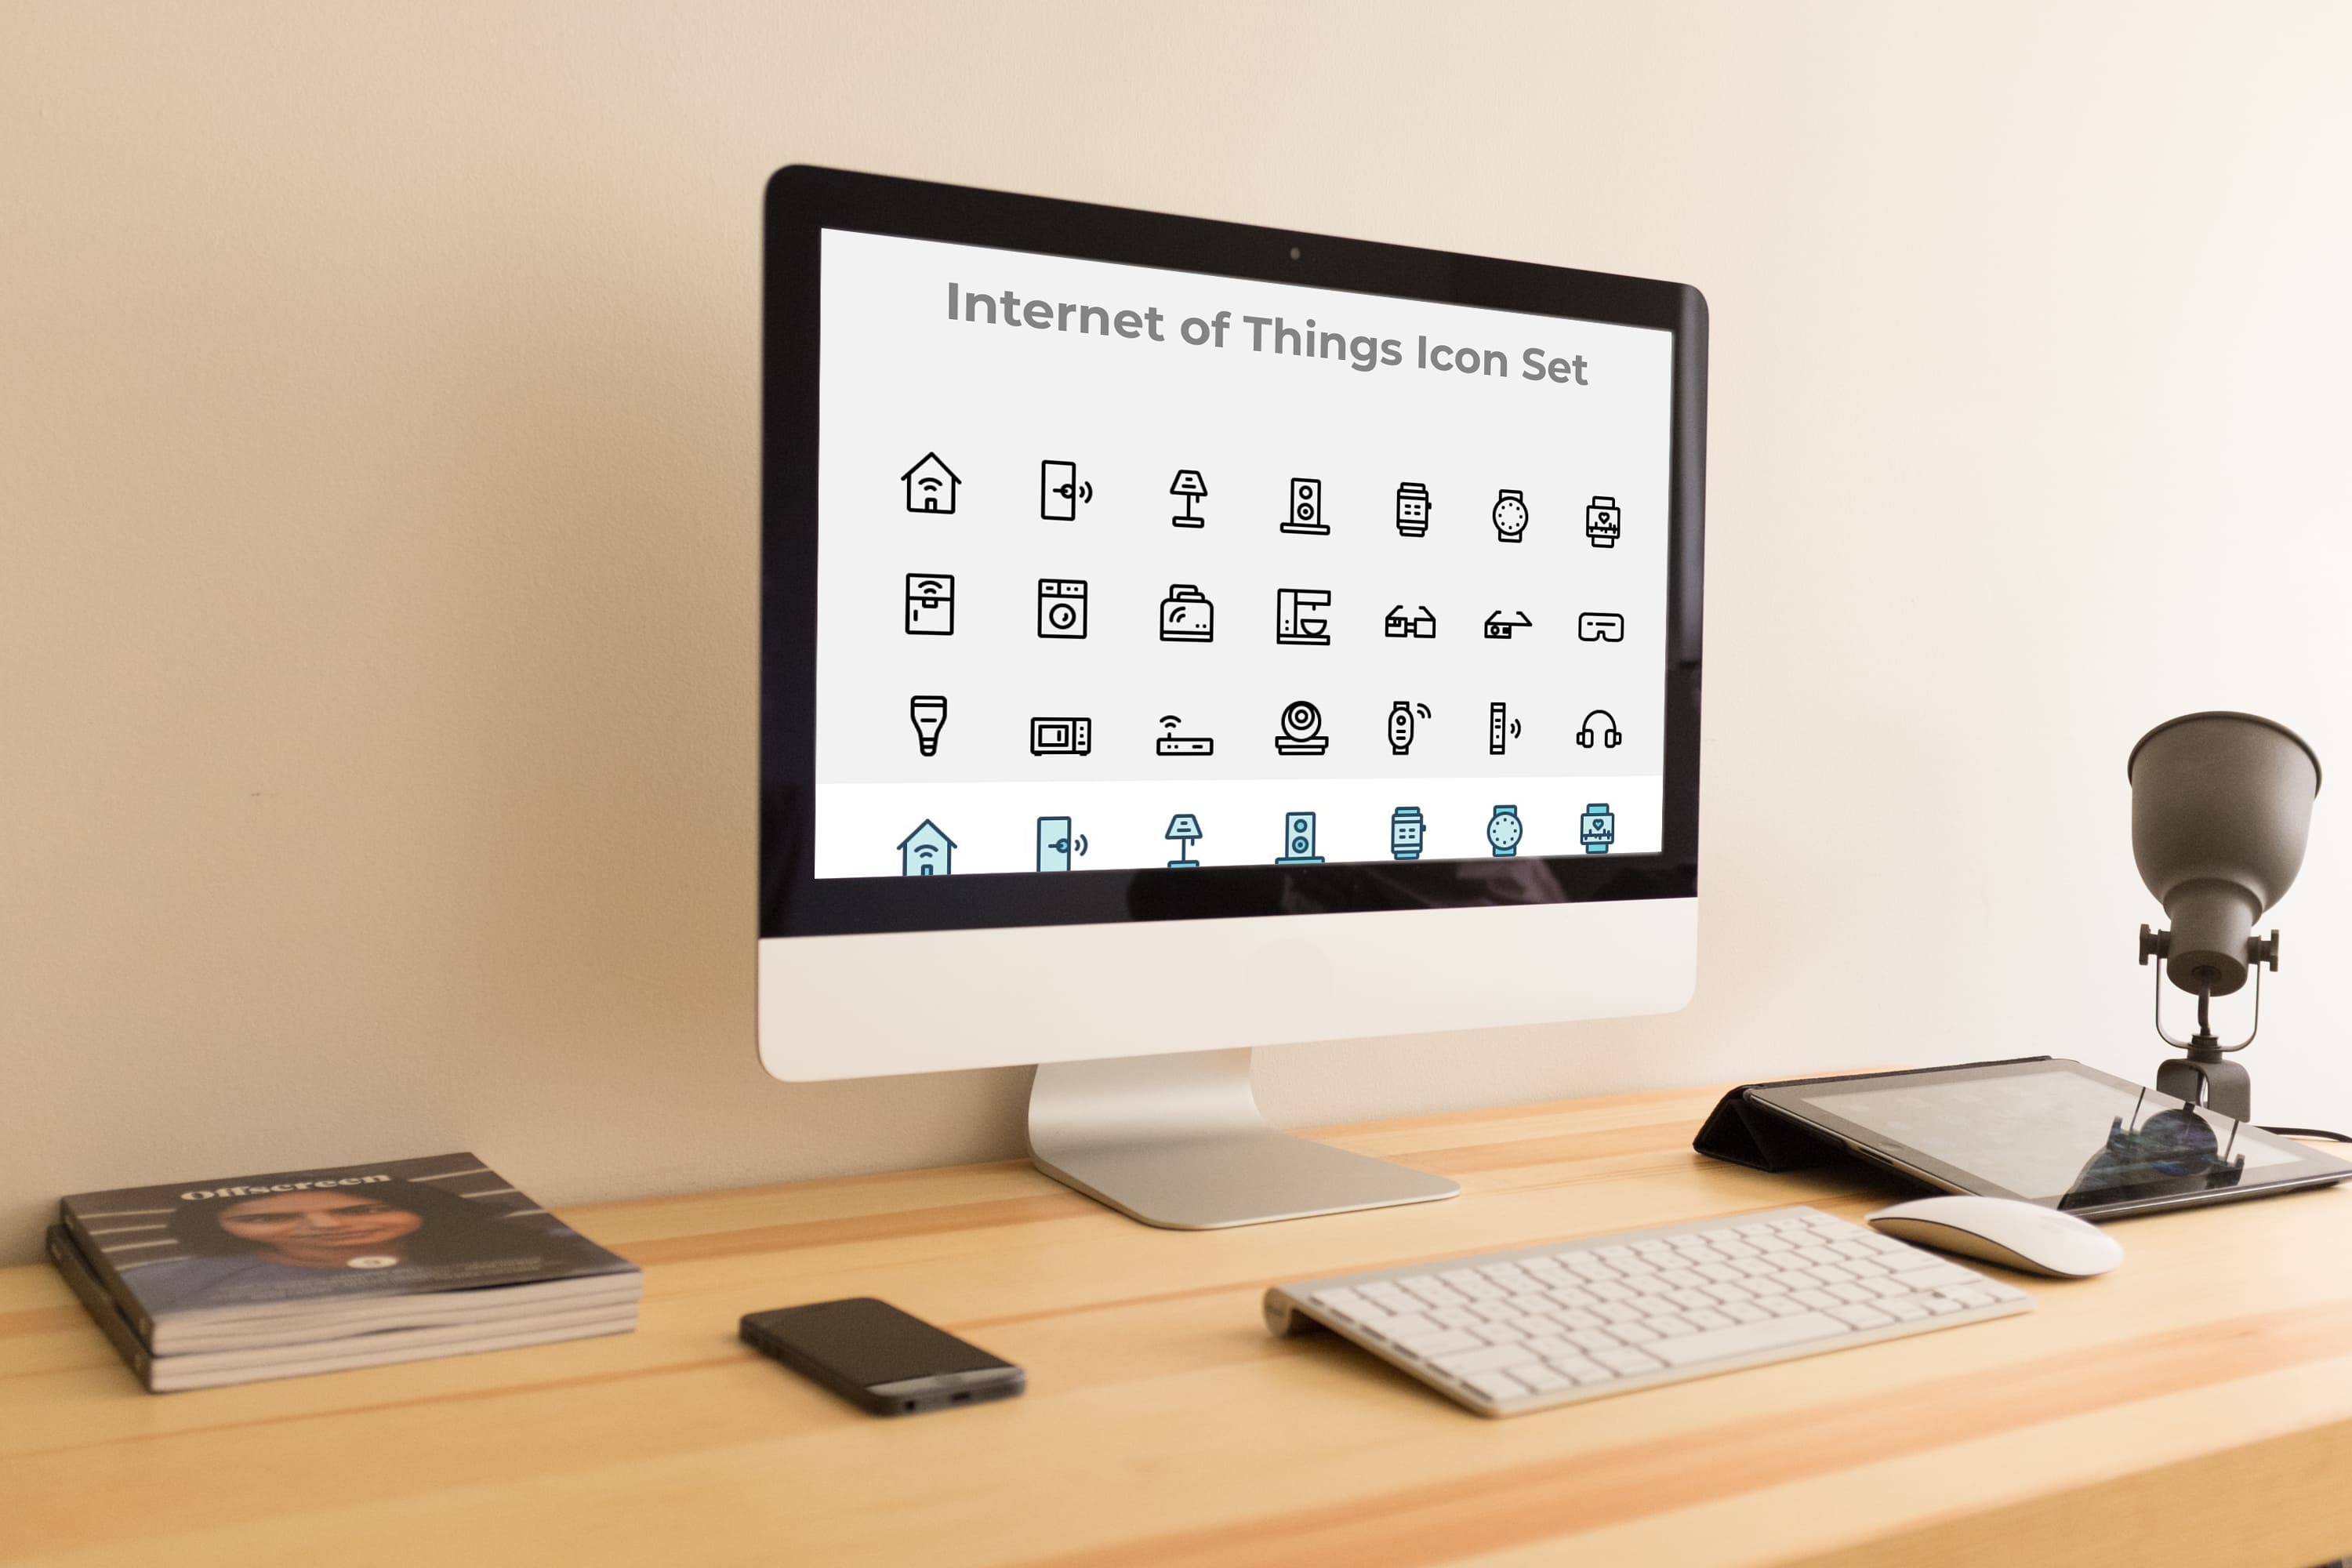 Desktop option of the Internet of Things Icon Set.